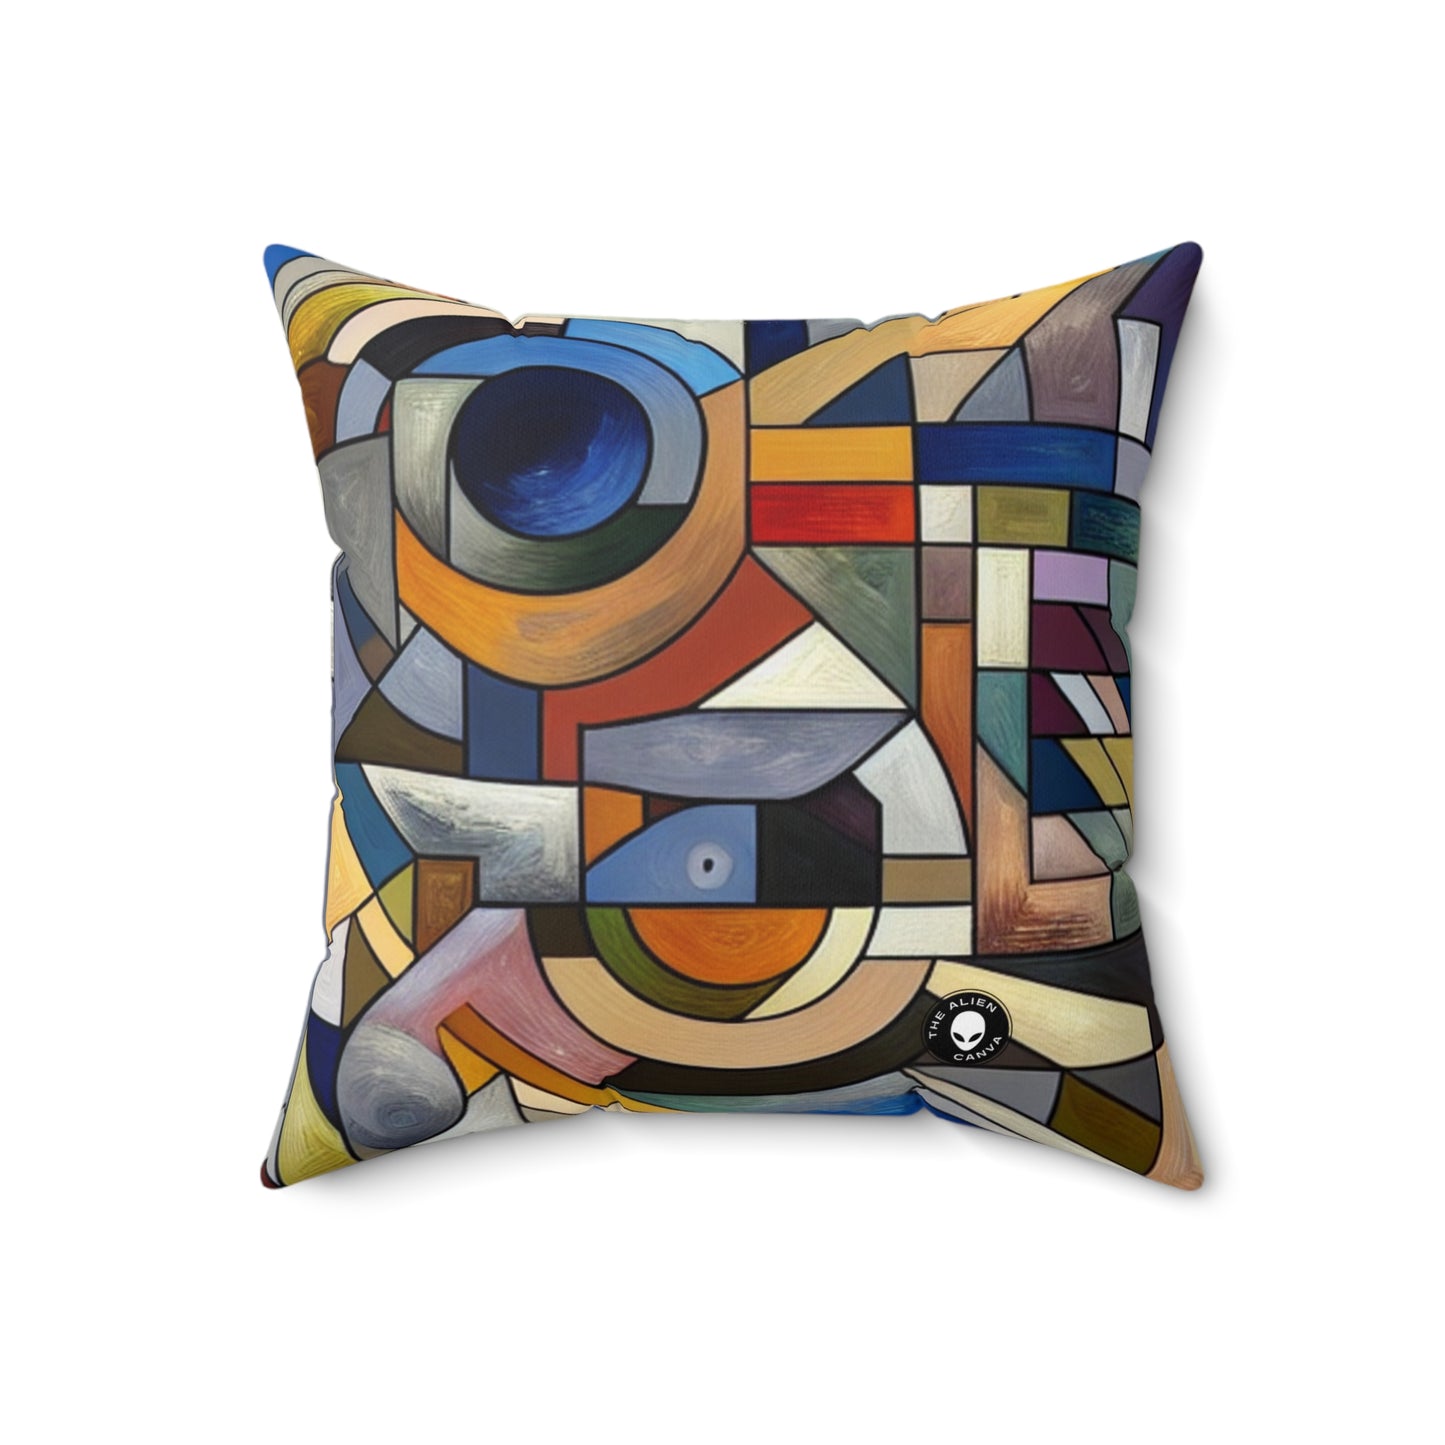 "Urban Fragmentation: An Analytical Cubist Cityscape"- The Alien Spun Polyester Square Pillow Analytical Cubism